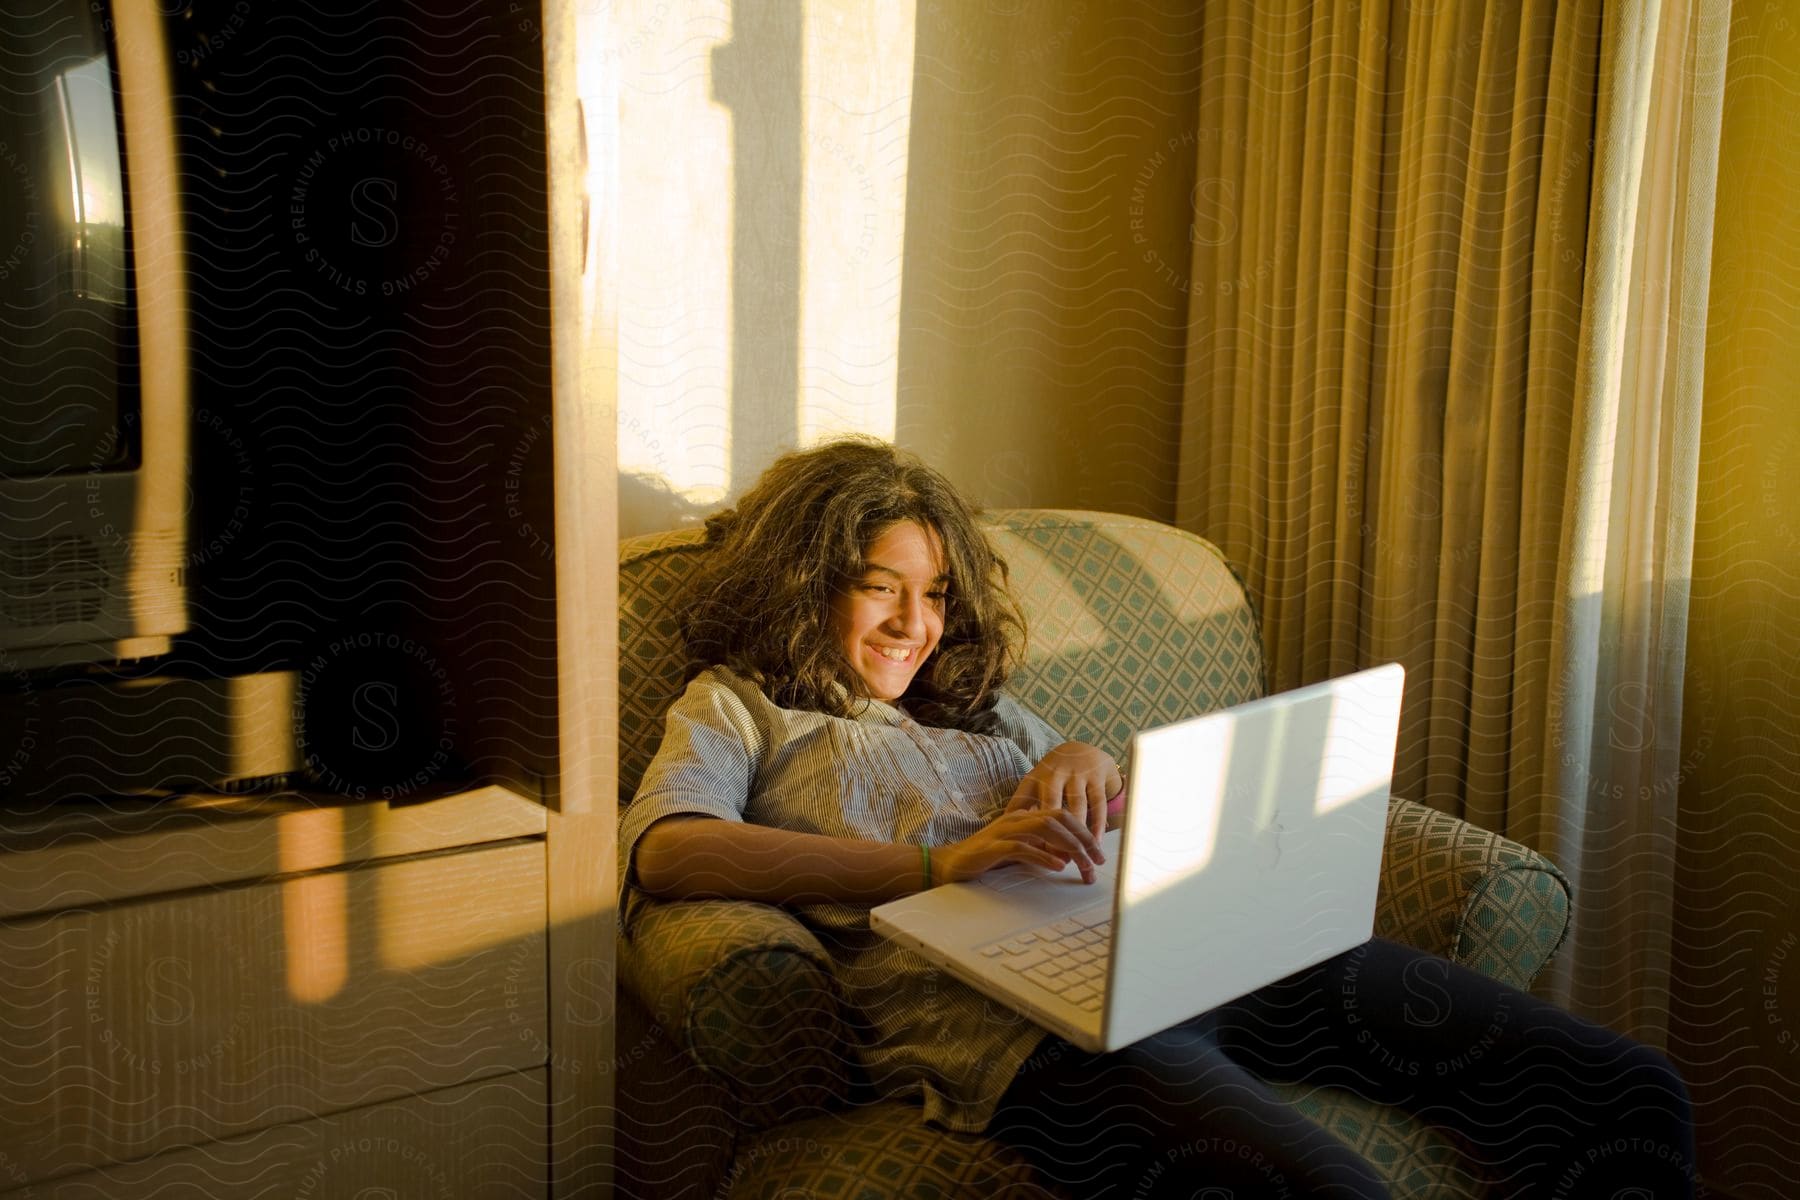 A girl sits on an armchair next to a tv and smiles while using a laptop in a room with sunlight coming through the curtain